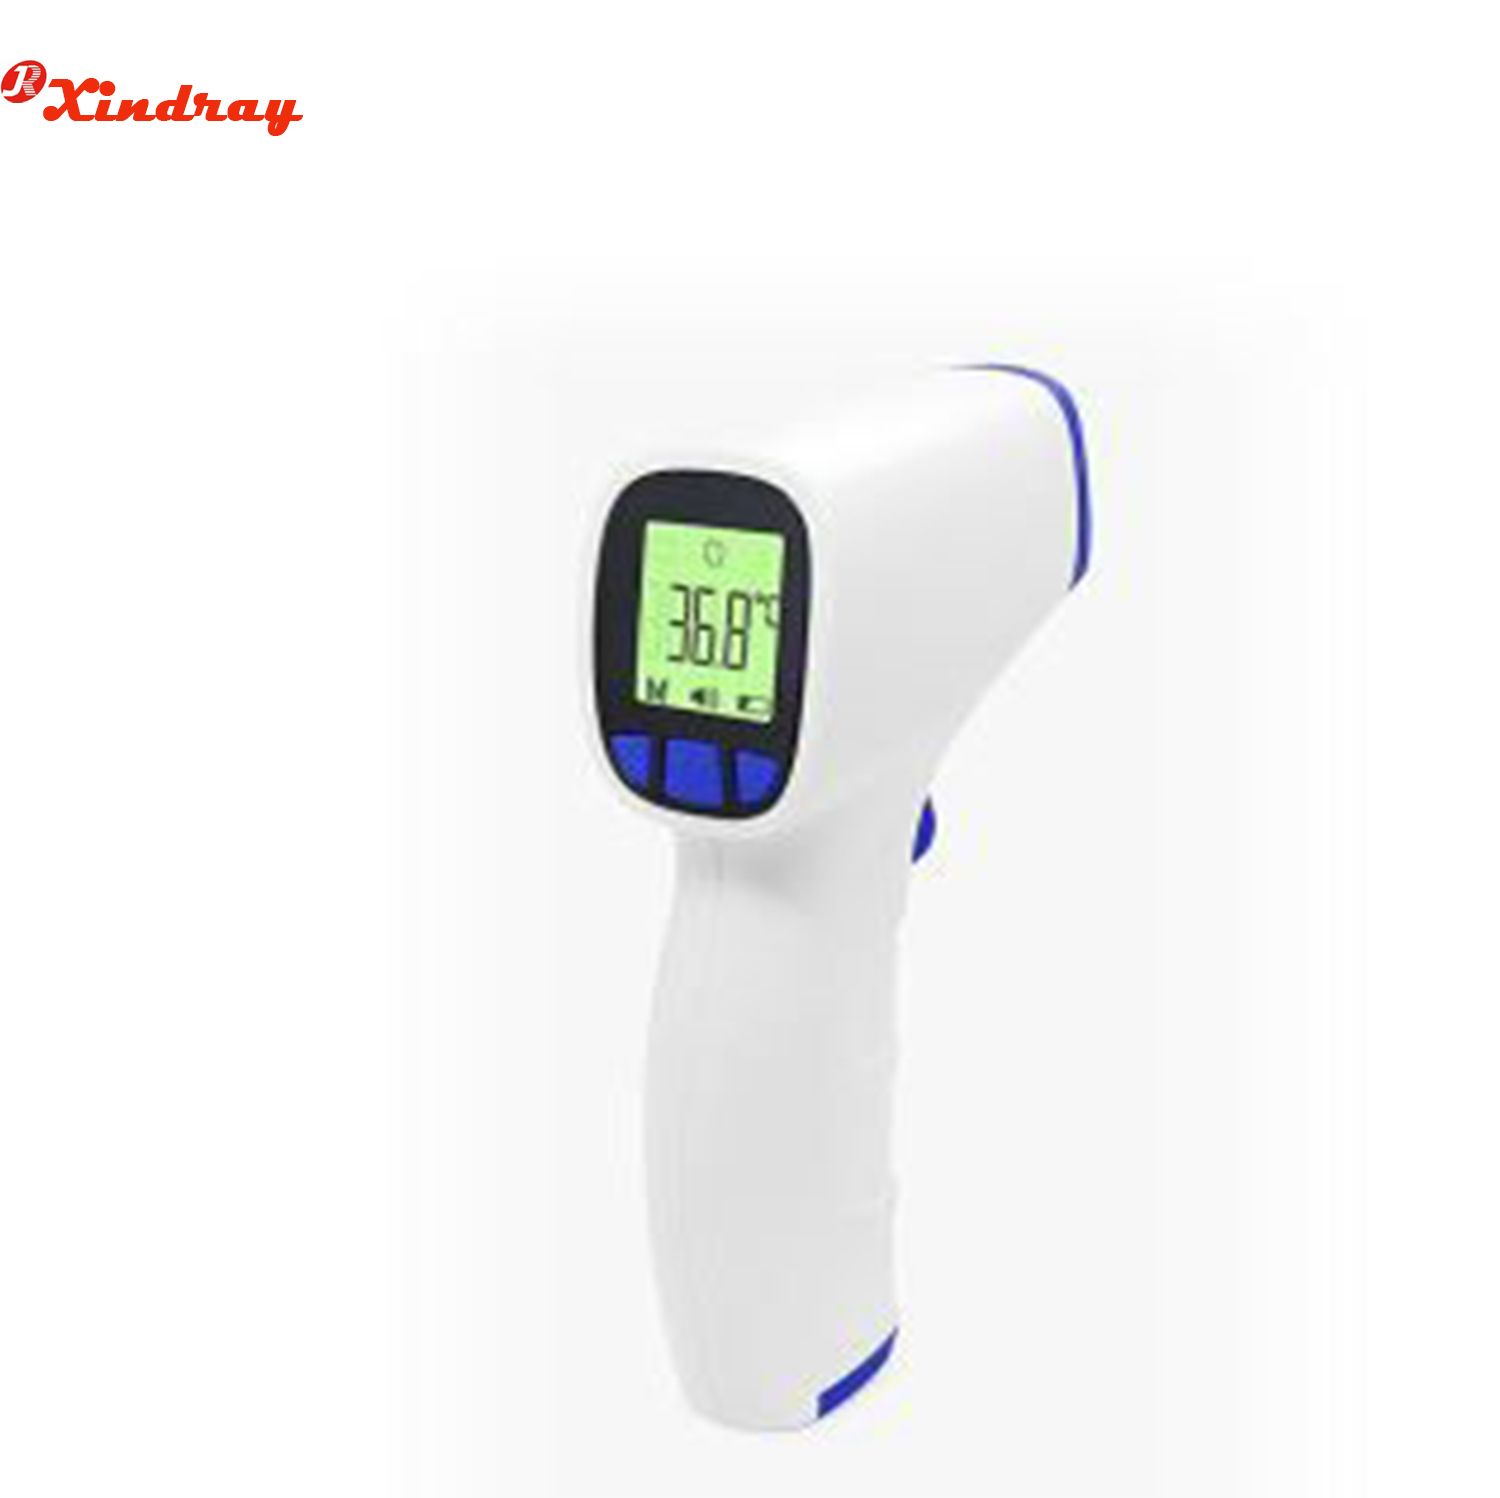 Hot Sale Non-contact Forehead Clinical Thermometer In Stock